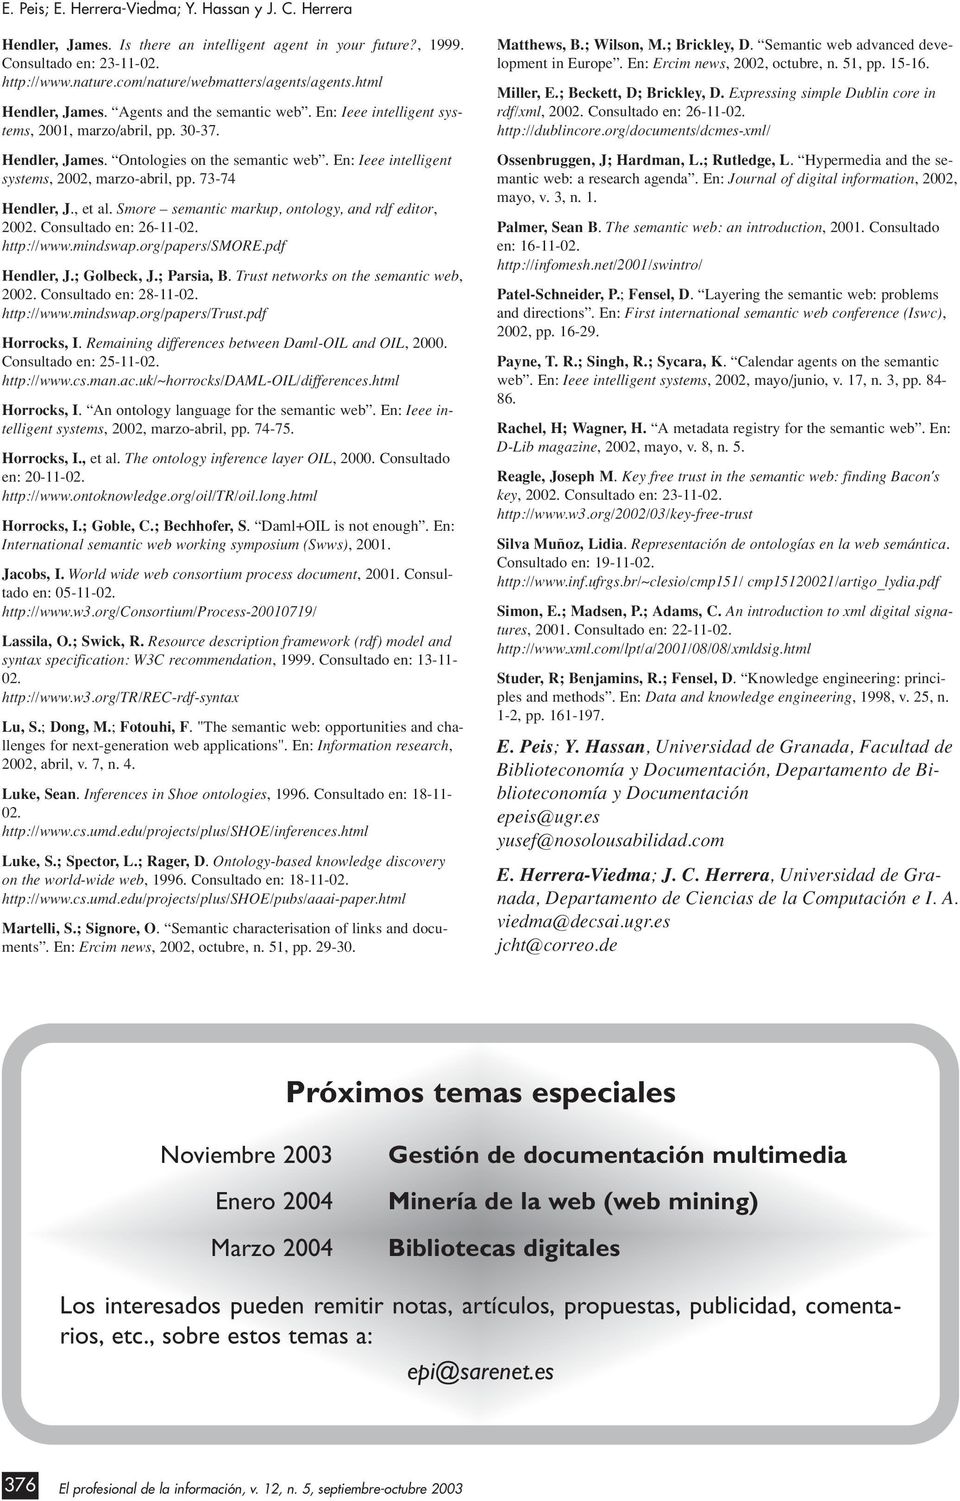 En: Ieee intelligent systems, 2002, marzo-abril, pp. 73-74 Hendler, J., et al. Smore semantic markup, ontology, and rdf editor, 2002. Consultado en: 26-11-02. http://www.mindswap.org/papers/smore.